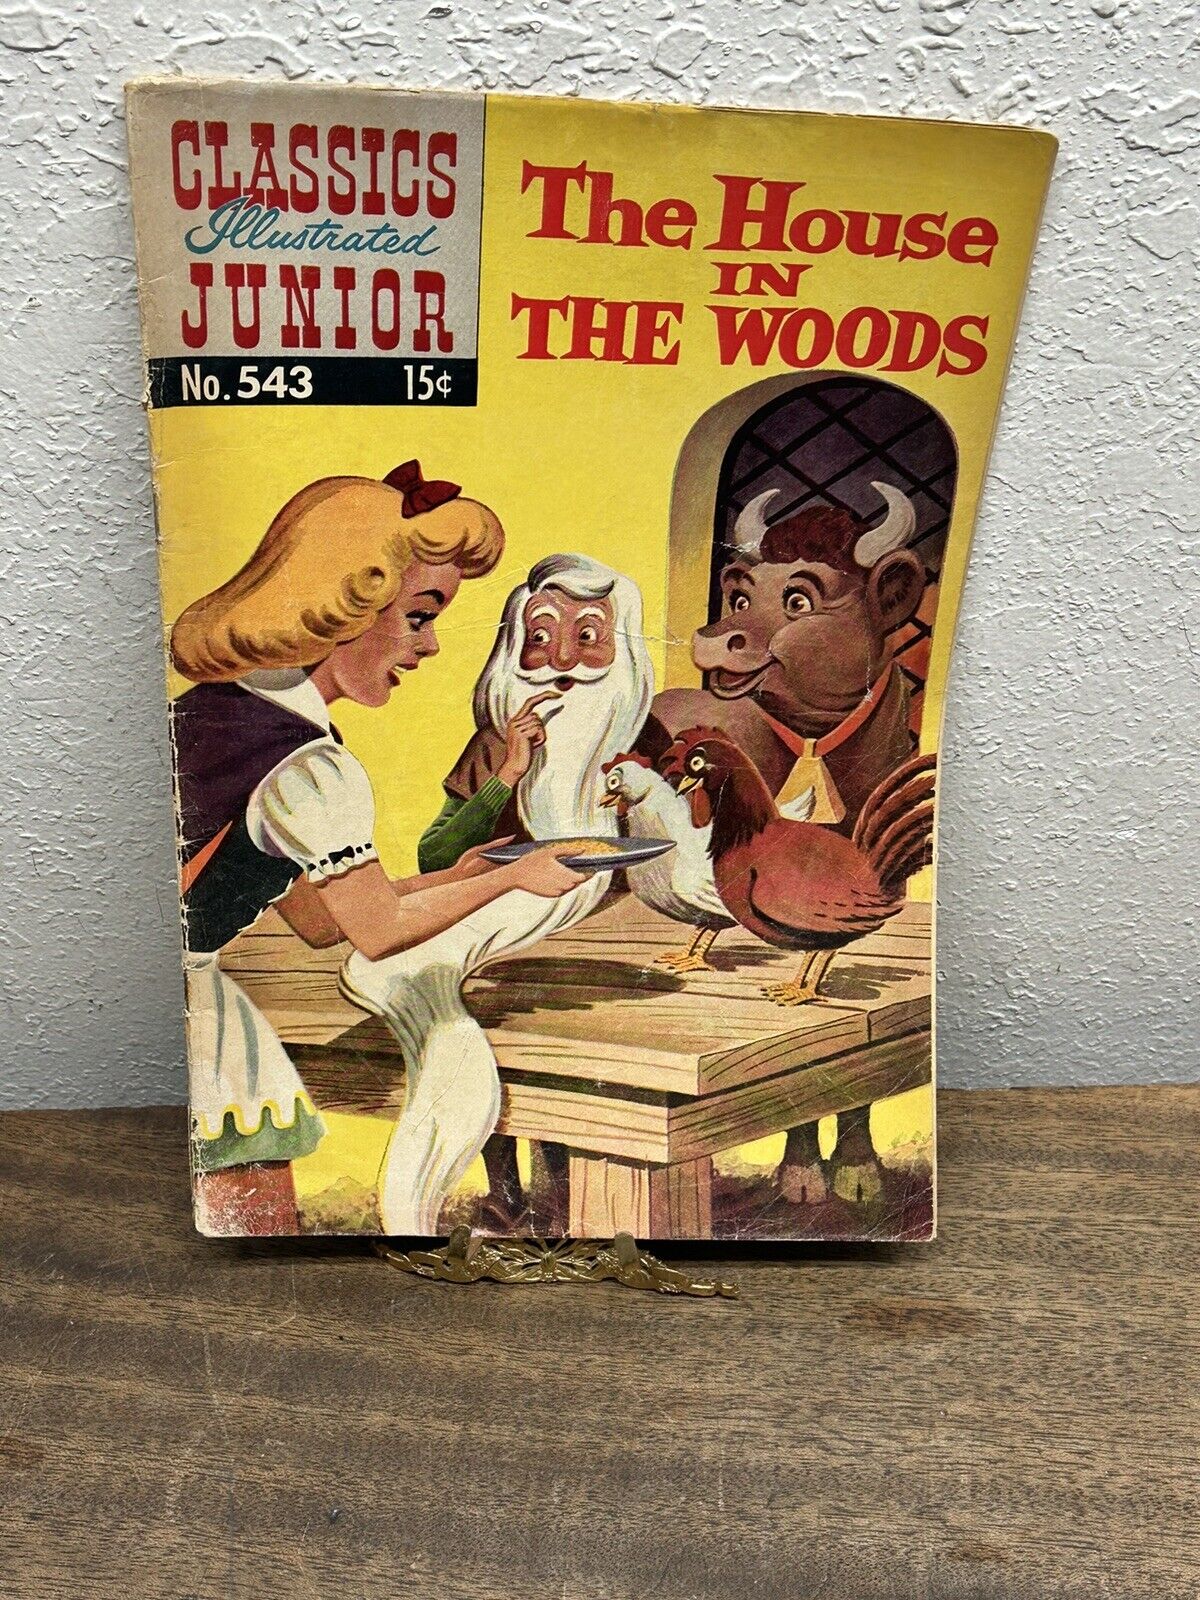 Classic Illustrated Junior #543 - The House in the Woods ~ Gilberton ~ 4.5